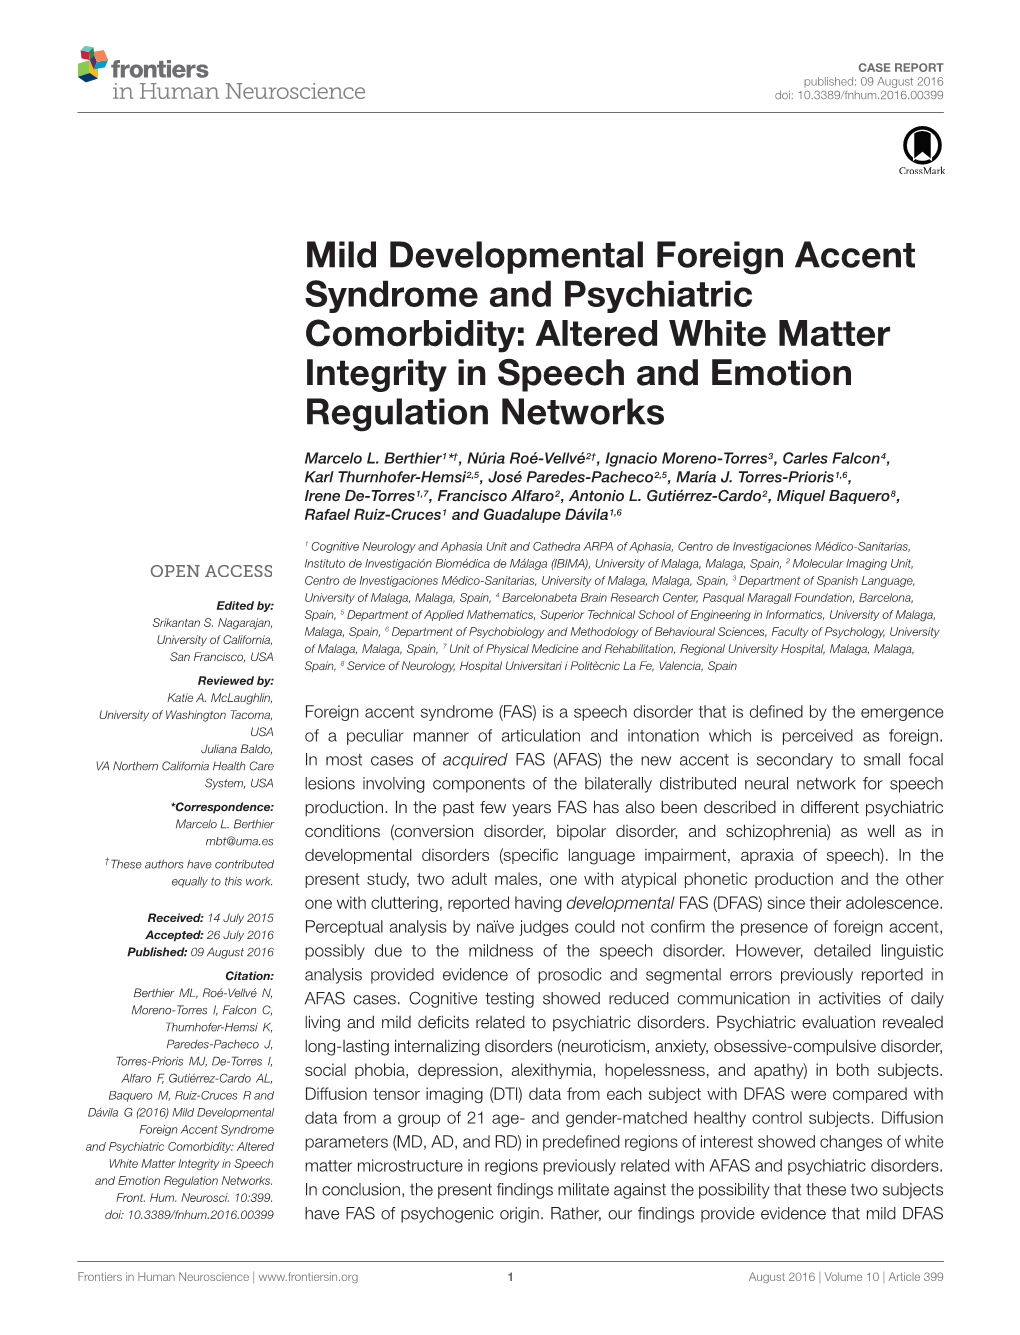 Mild Developmental Foreign Accent Syndrome and Psychiatric Comorbidity: Altered White Matter Integrity in Speech and Emotion Regulation Networks